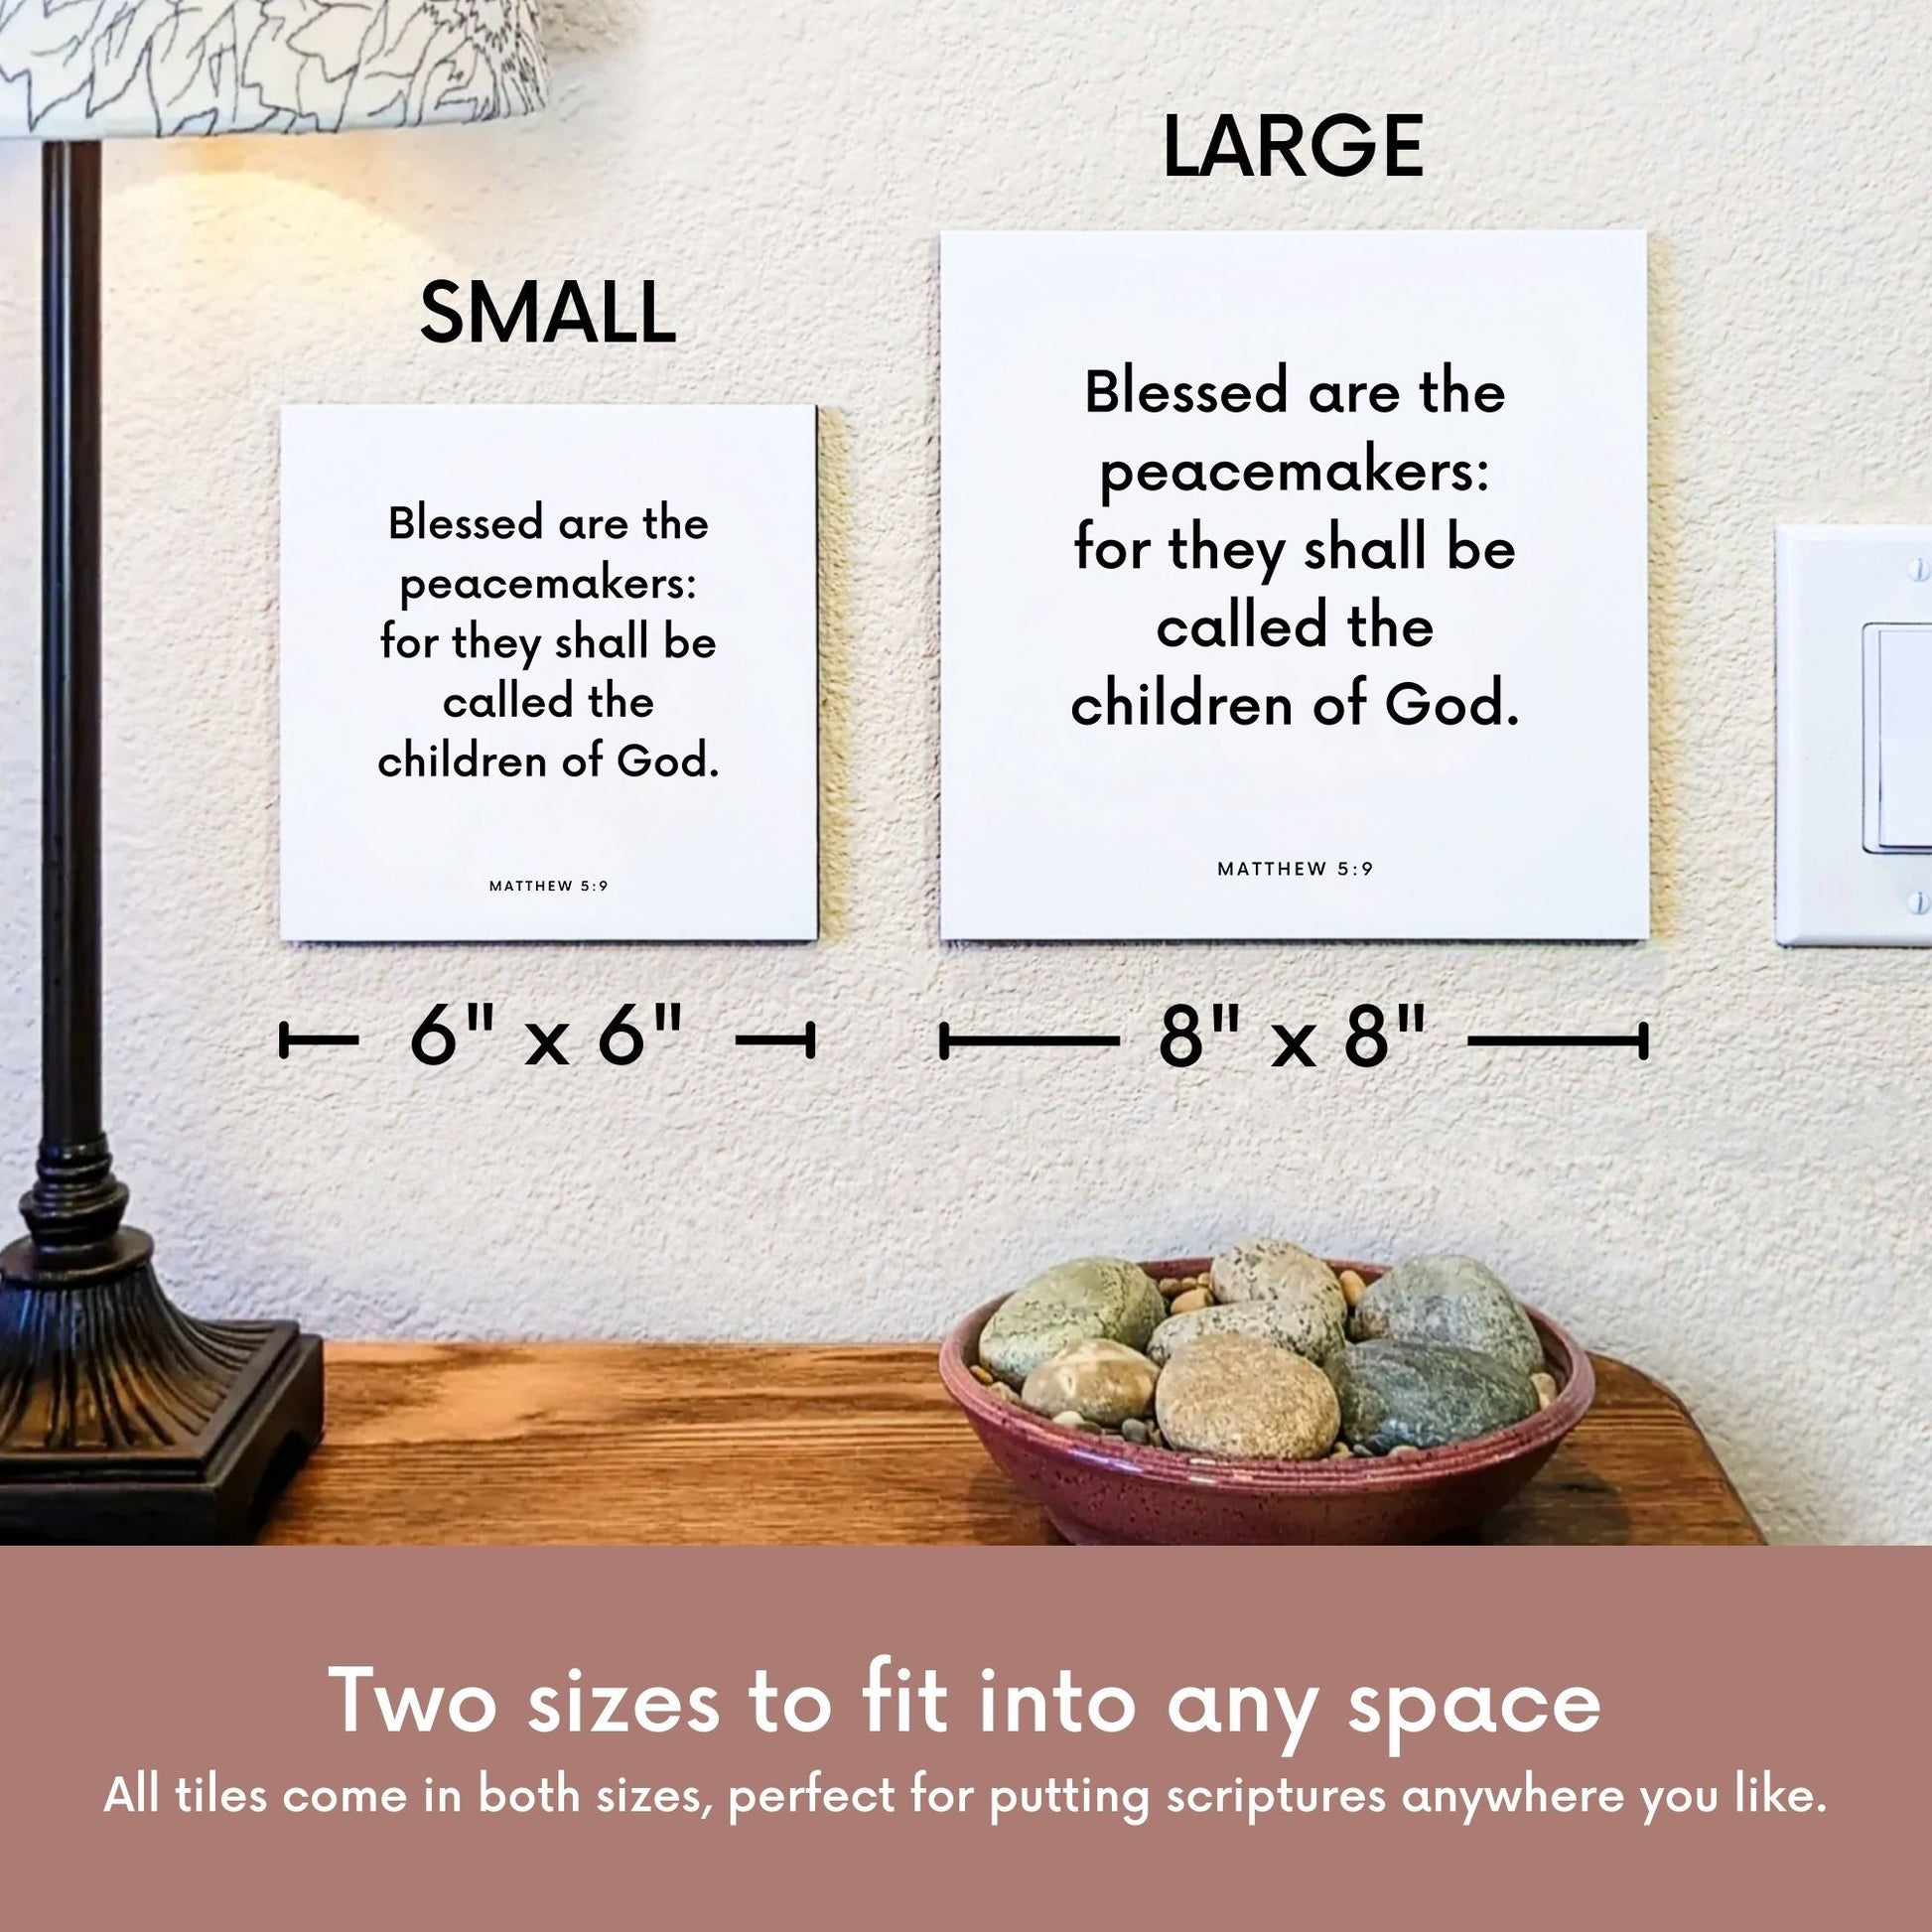 Scripture tile size comparison for Matthew 5:9 - "Blessed are the peacemakers"